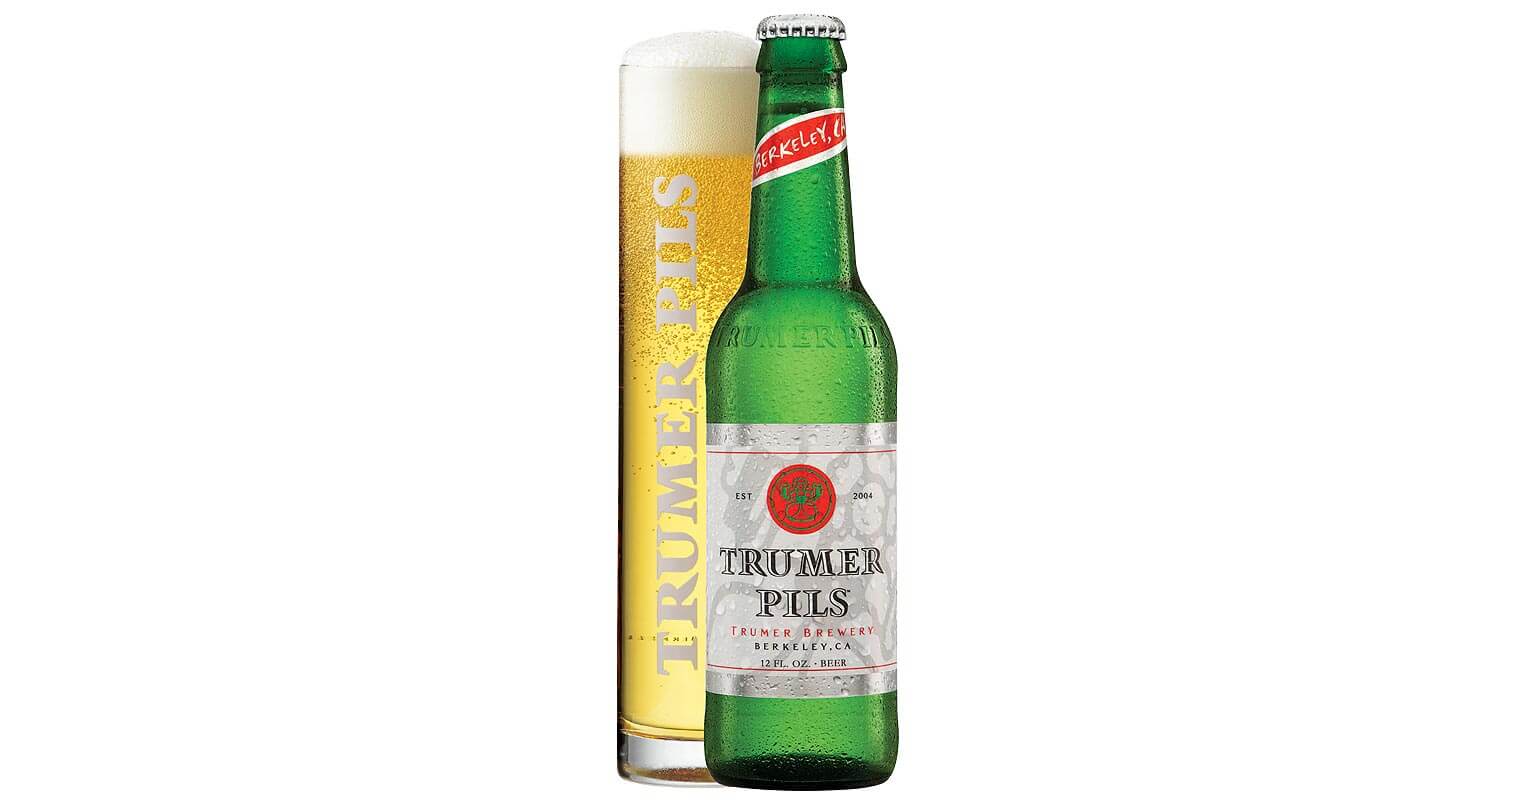 Trumer Pils, bottle and draft, featured image